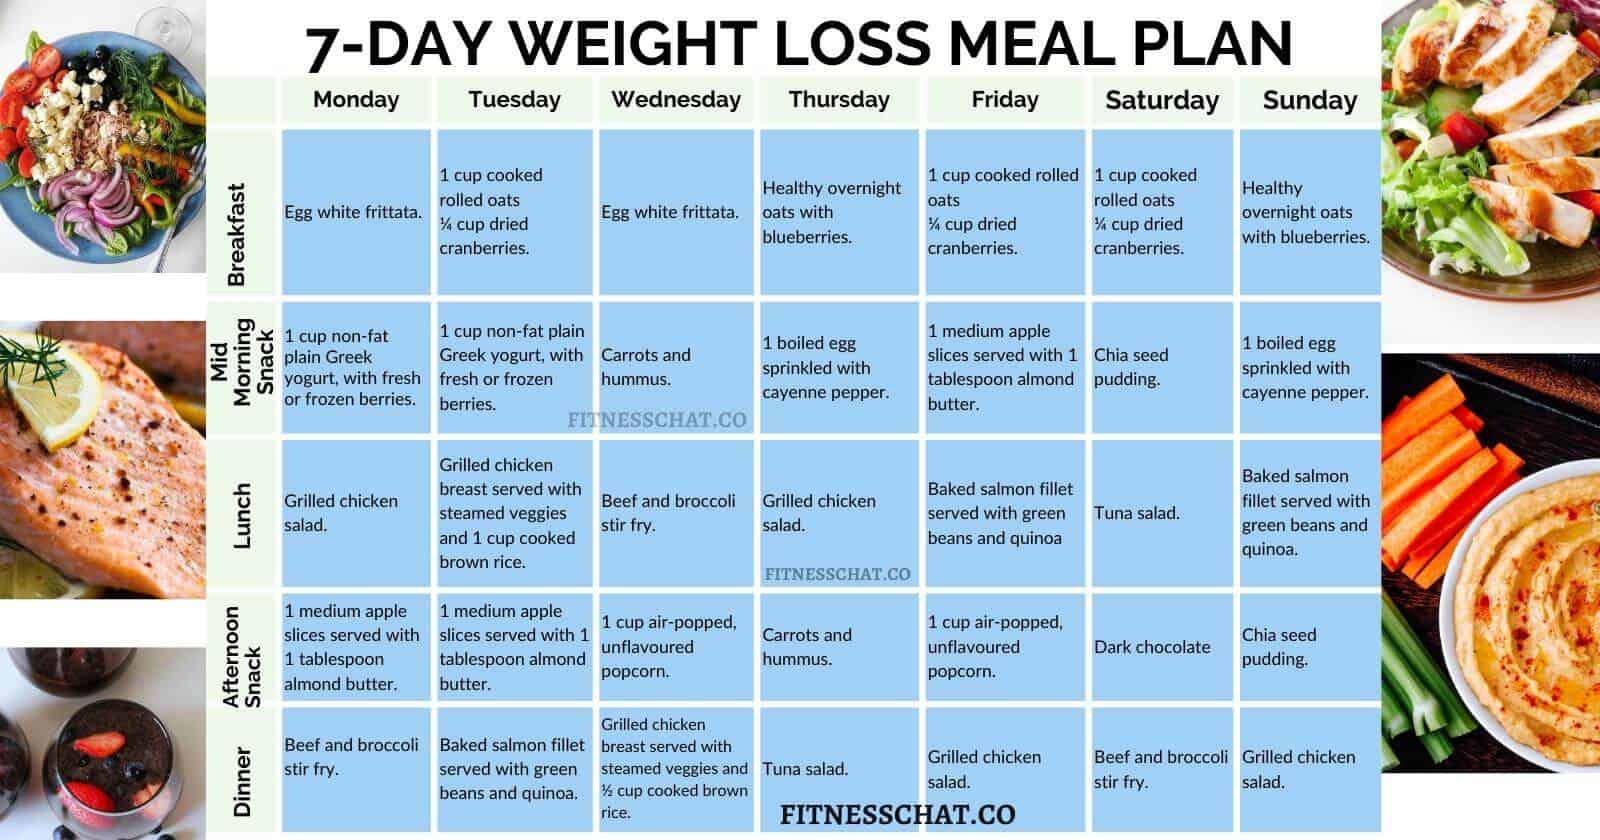 diet chart to lose weight in 7 days